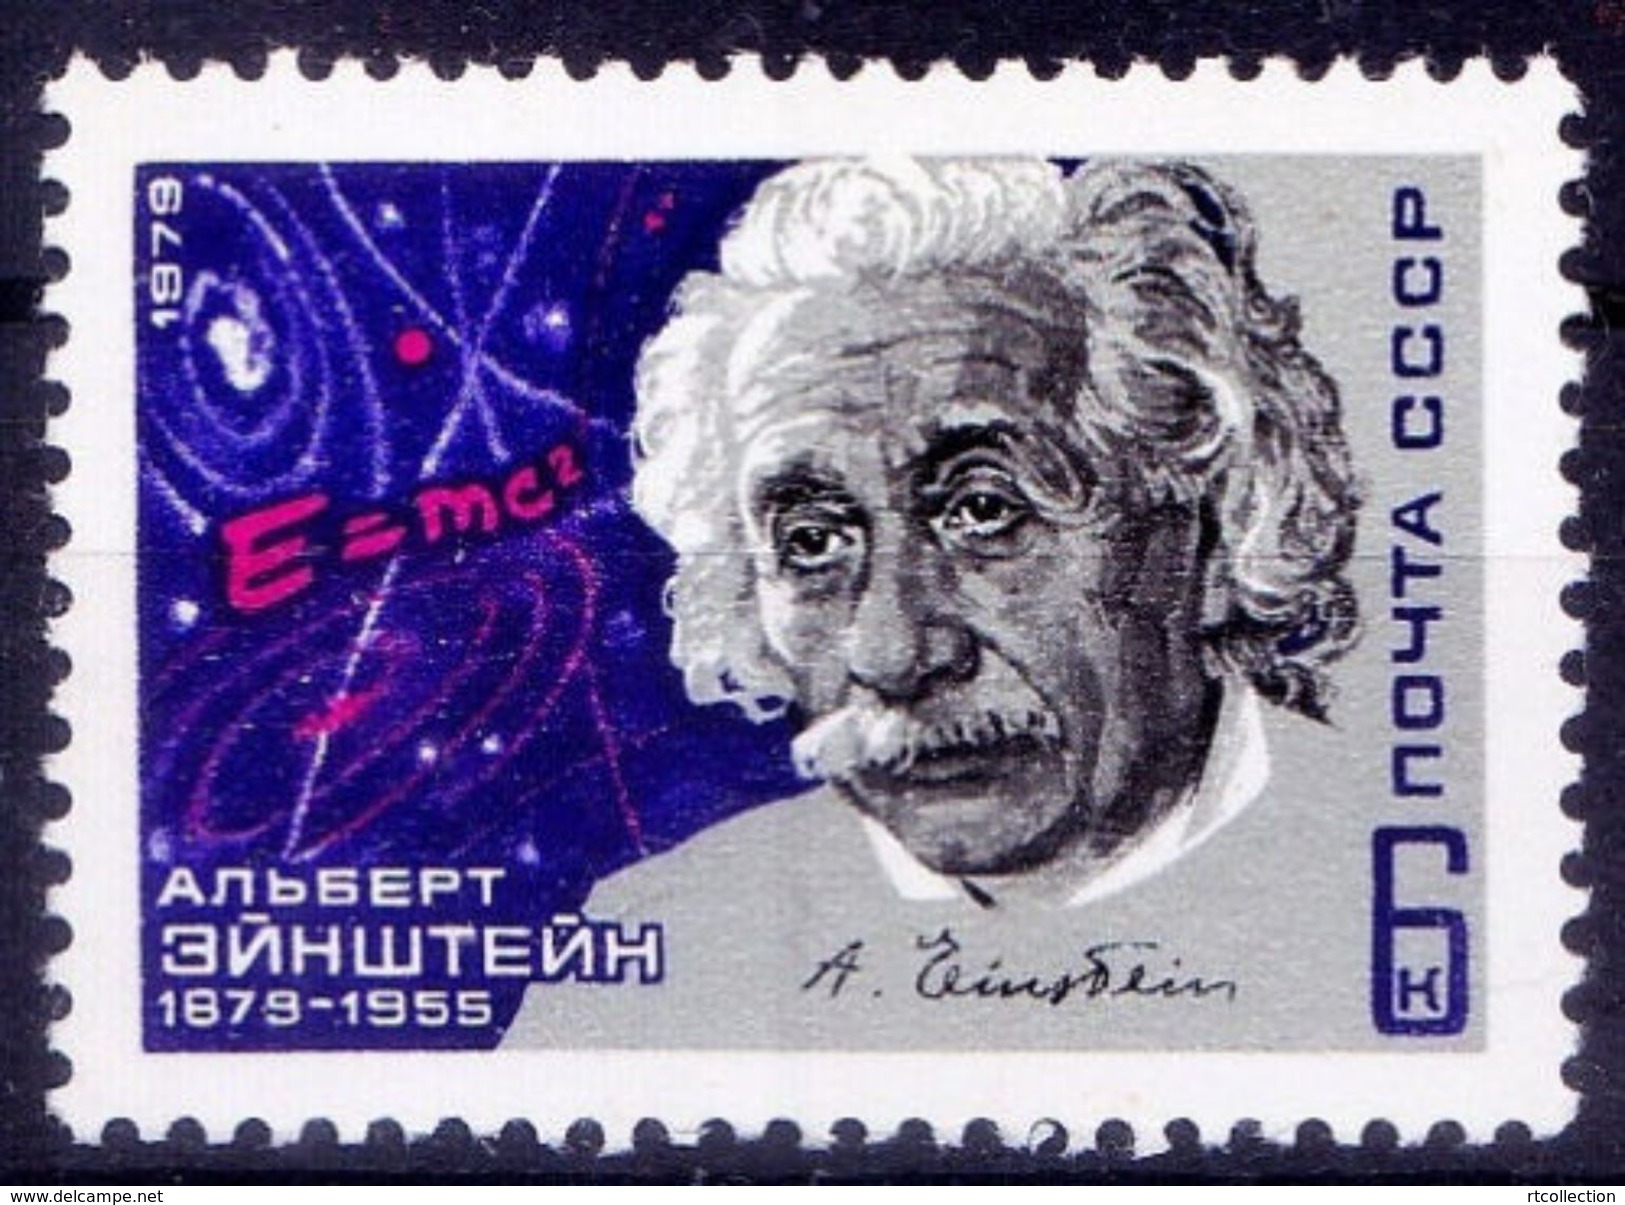 USSR Russia 1979 Famous People Albert Einstein Nobel Physics Physicist Sciences Soviet Stamp MNH Michel 4828 SG 4868 - Physique